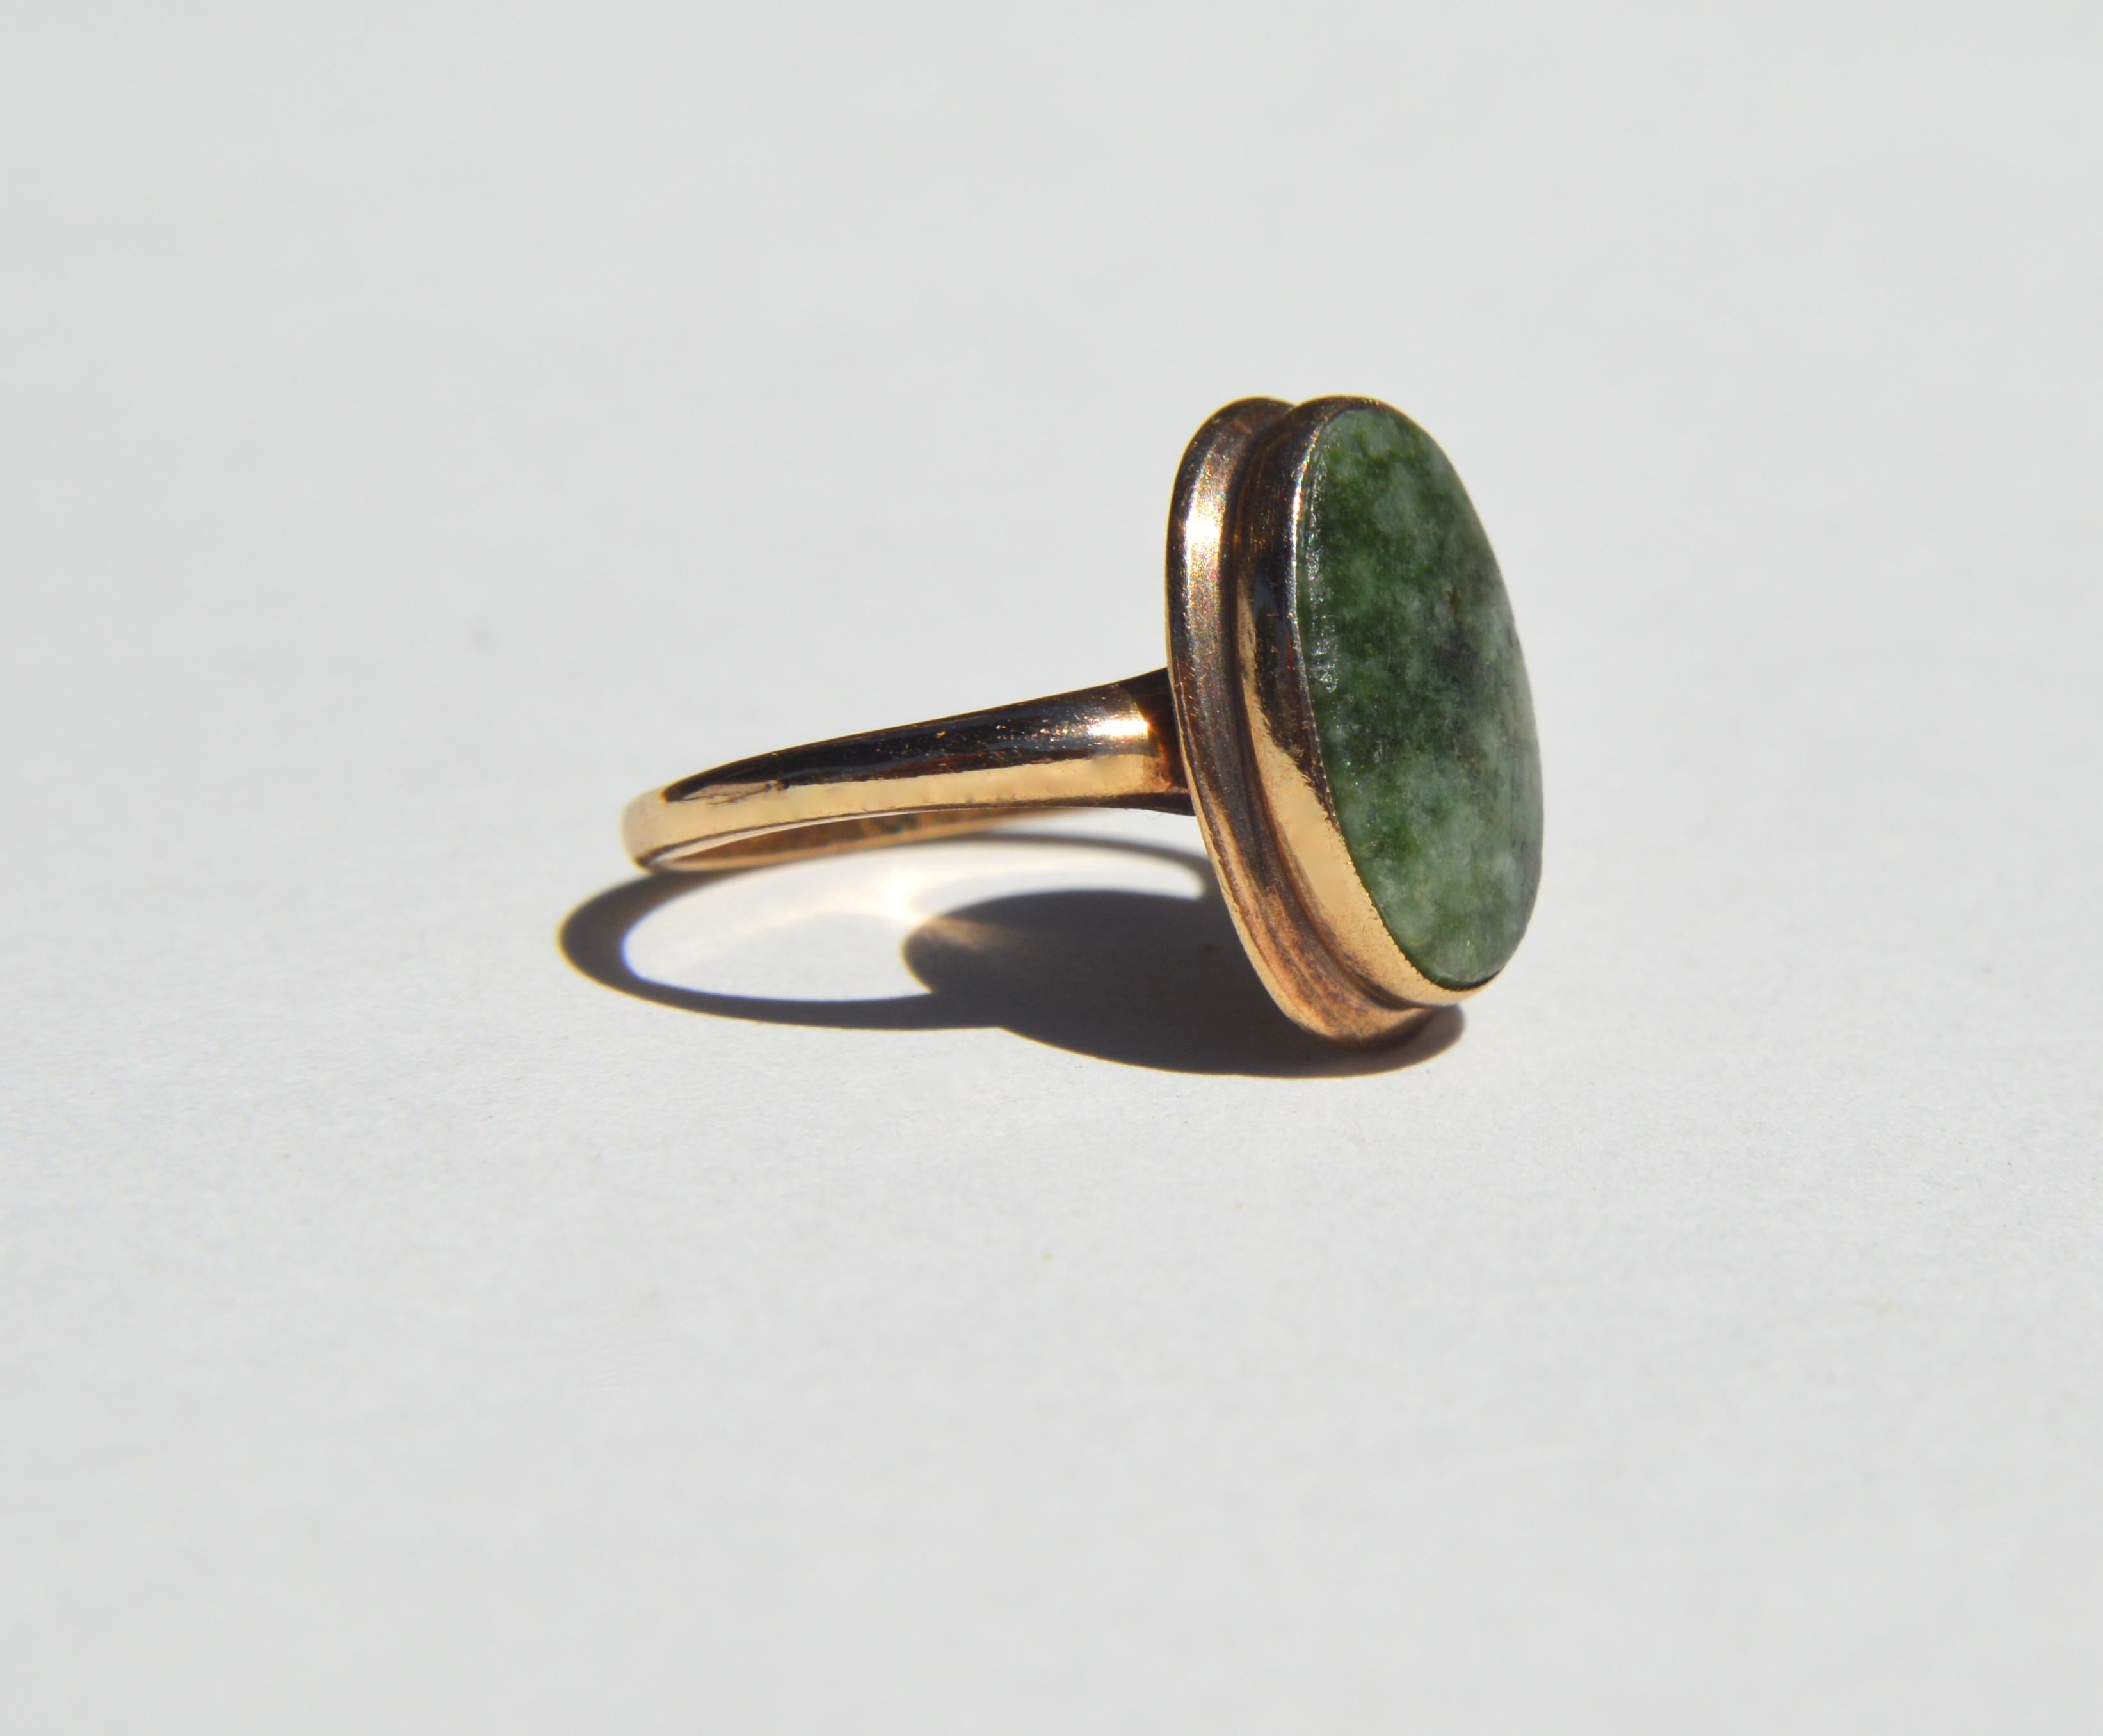 Beautiful Art Deco era 1920s nephrite jade 10K yellow gold signet ring. Size 6.25, can be resized for an additional $40. Marked as 10K PSCO (Plainville Stock Company, established in 1884). Ring is in fair condition, the jade stone is a bit worn and